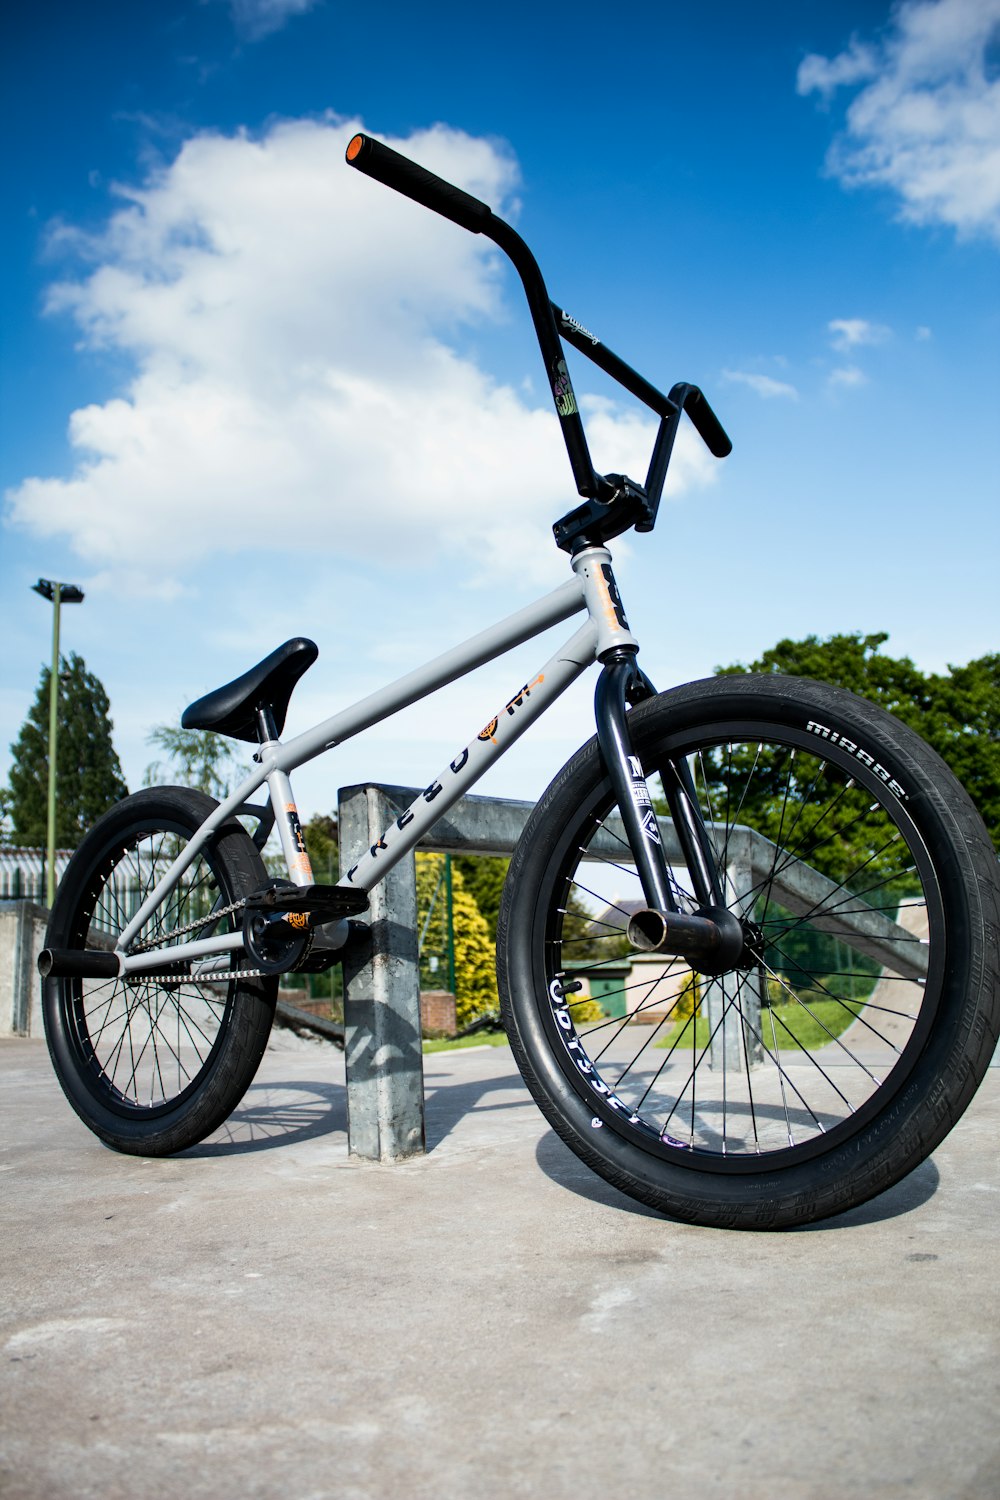 500+ Bmx Pictures [HD] | Download Free Images on Unsplash